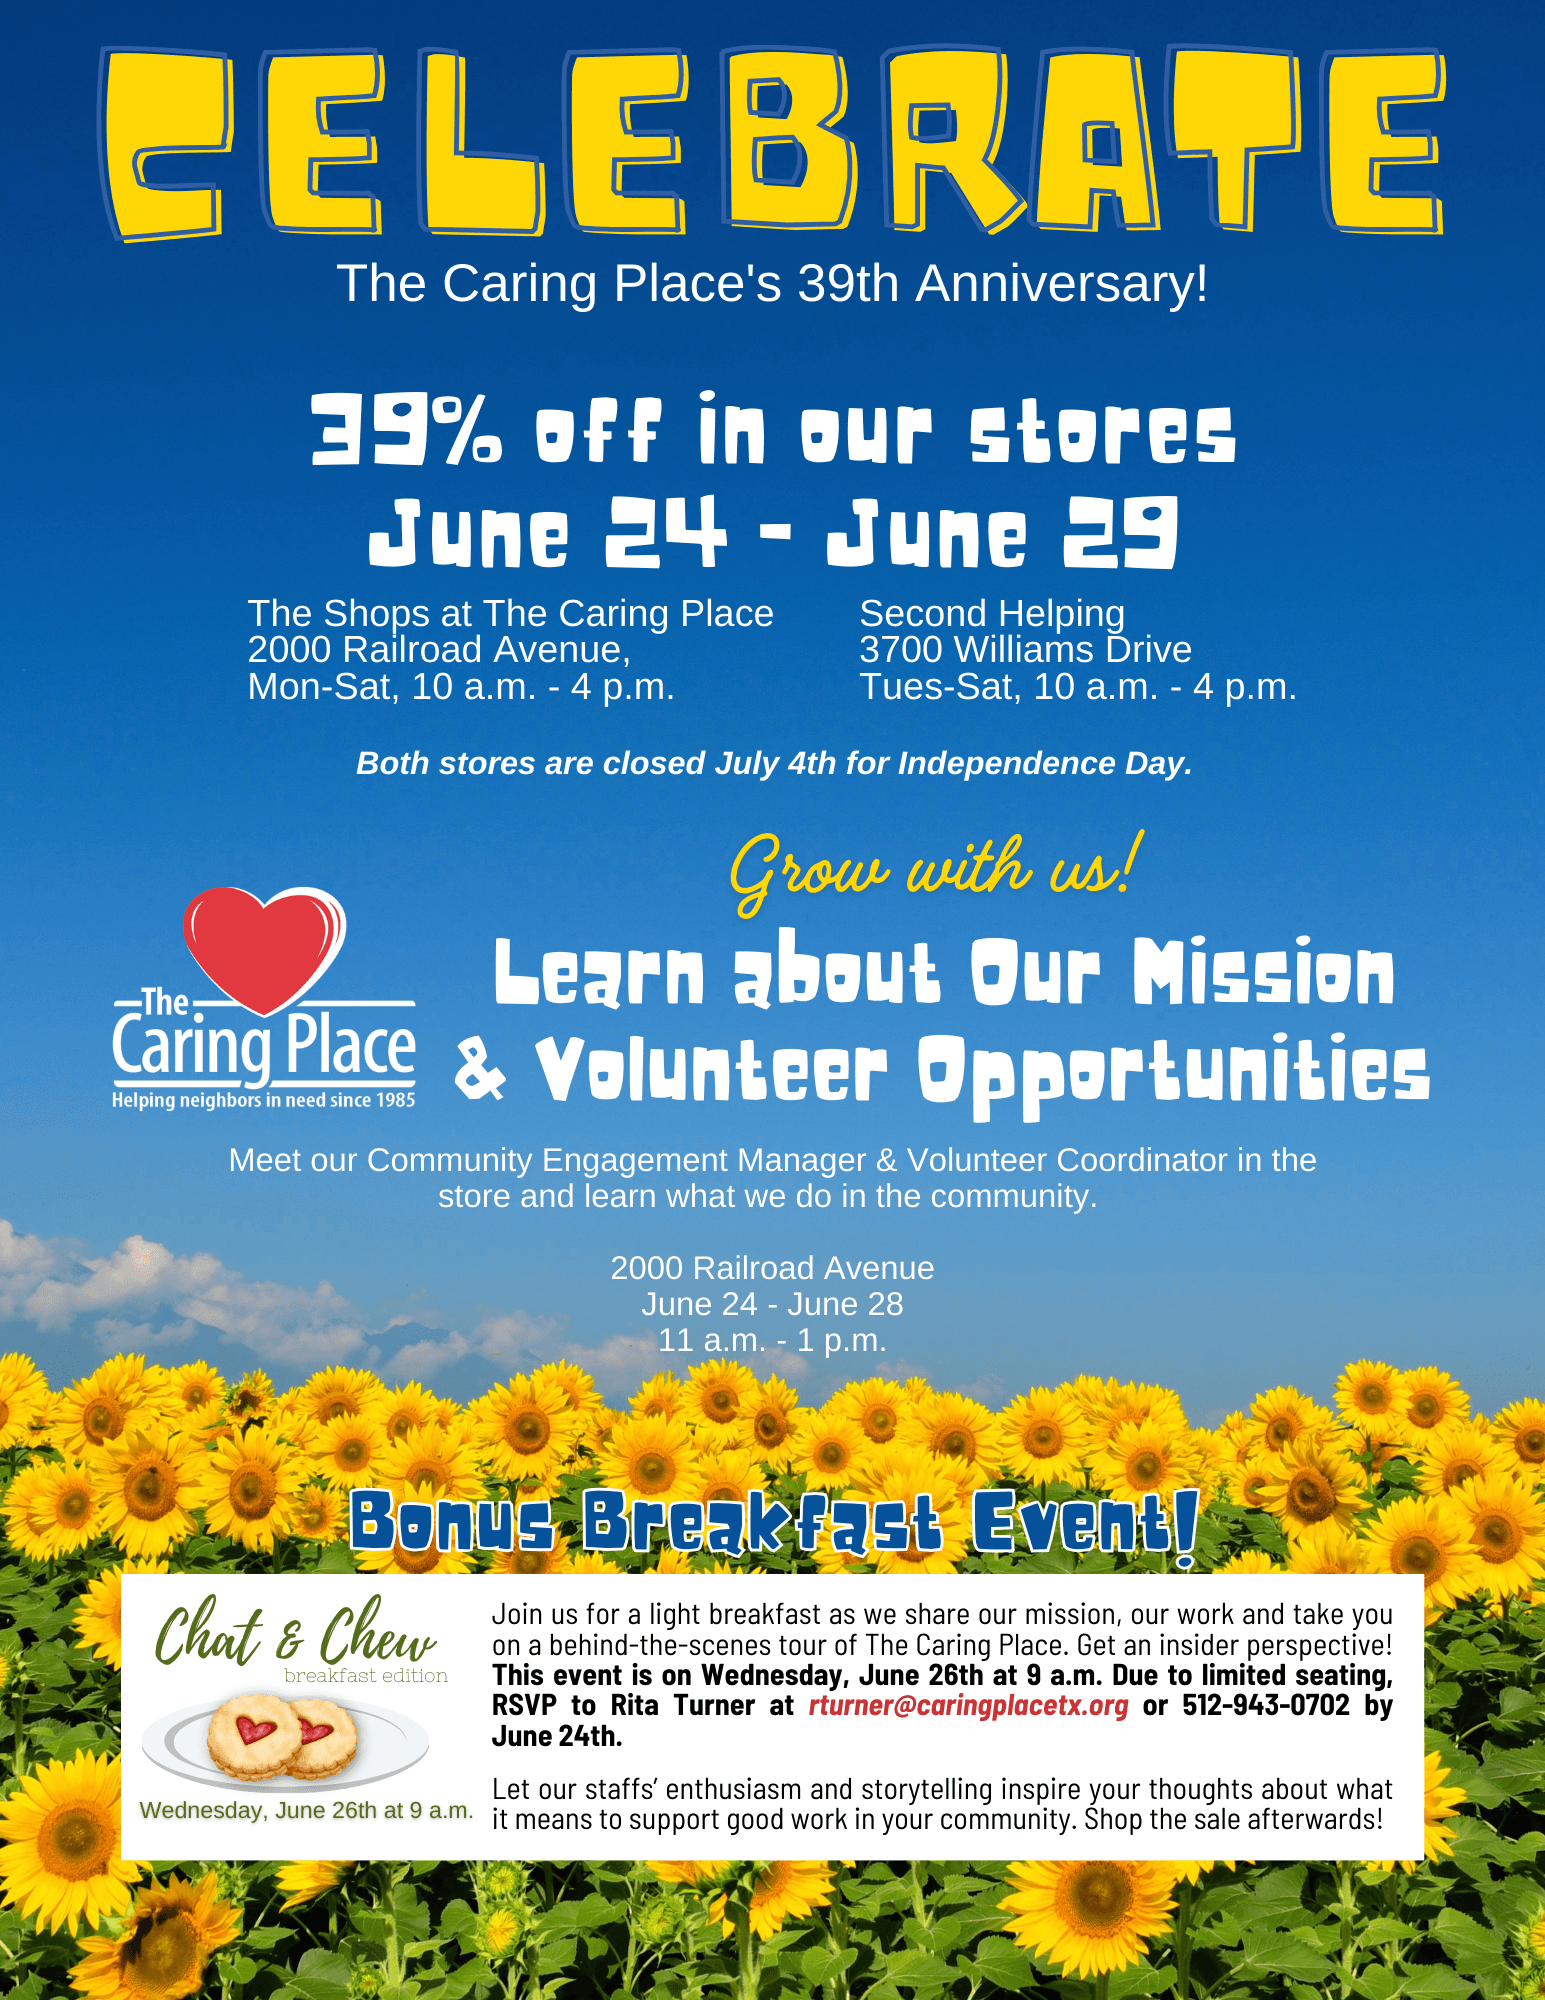 Anniversary Sale at The Caring Place June 24 - 29